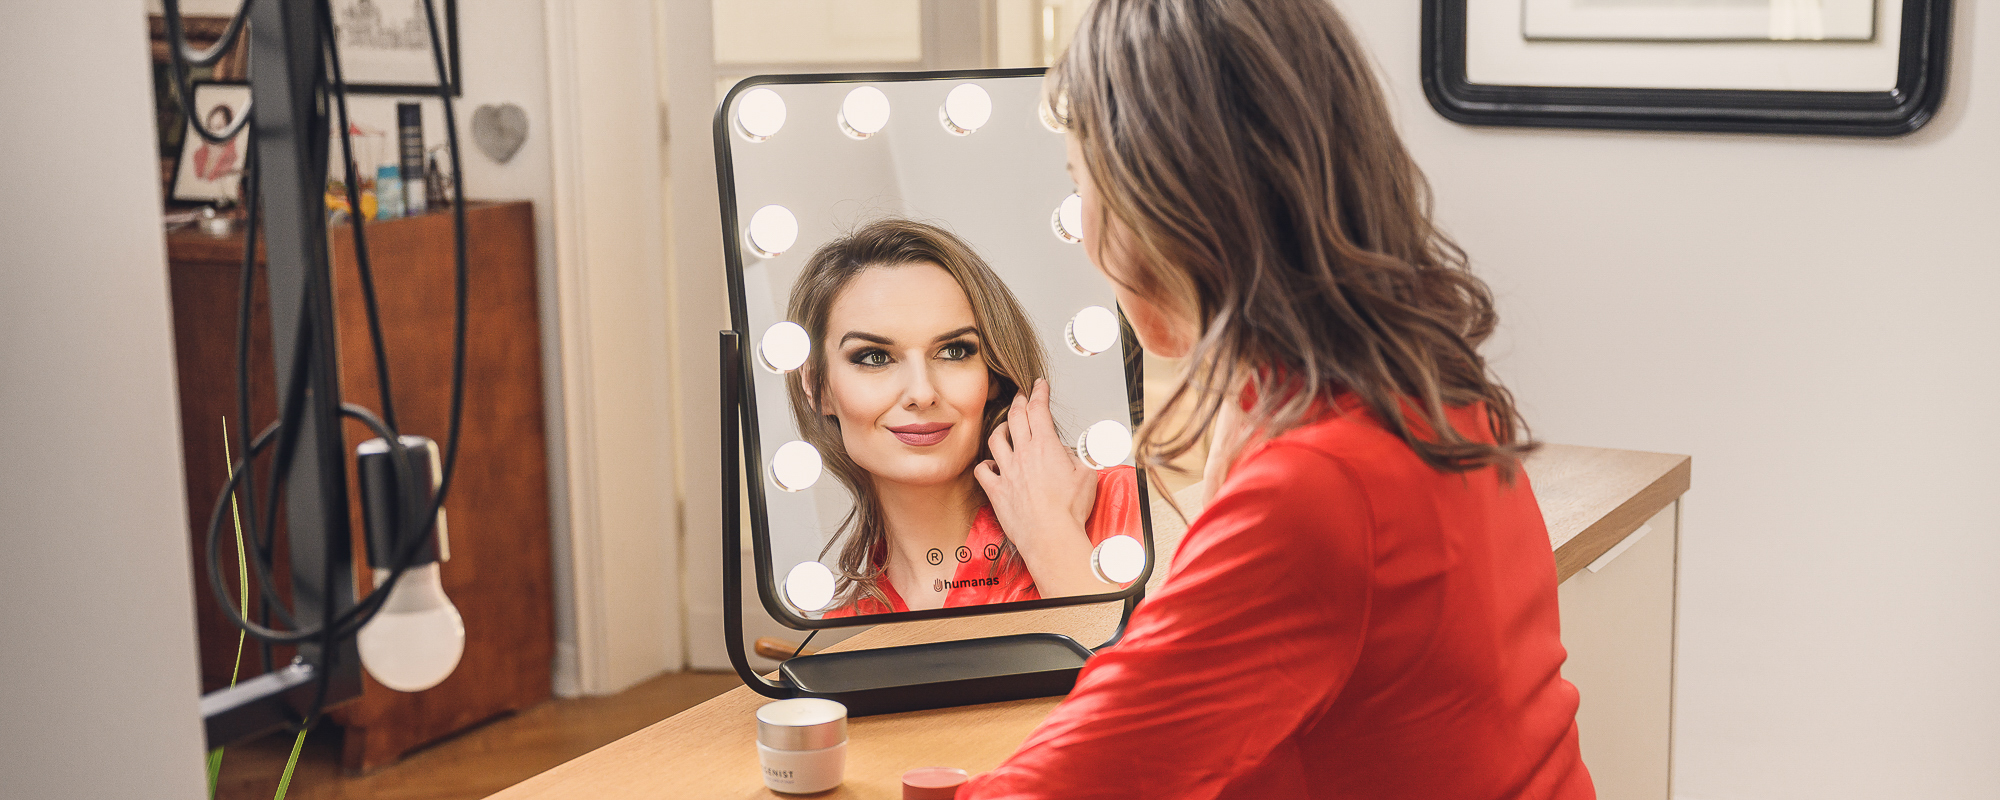 Young woman browses in mirror with LED lighting